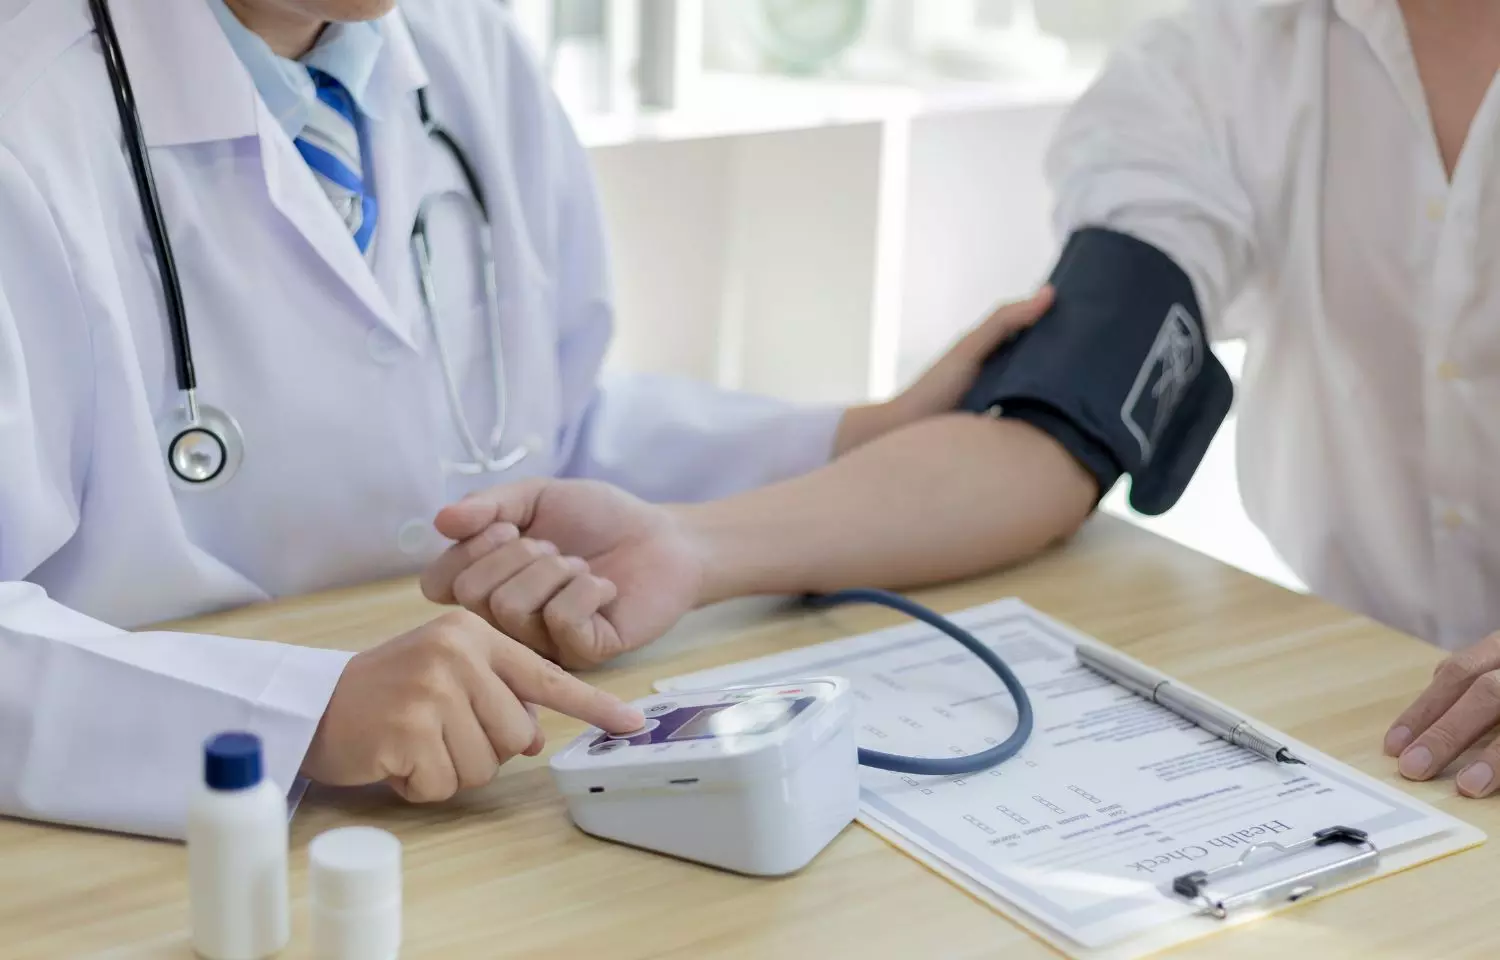 High blood pressure may double the risk of severe COVID, even after full vaccination